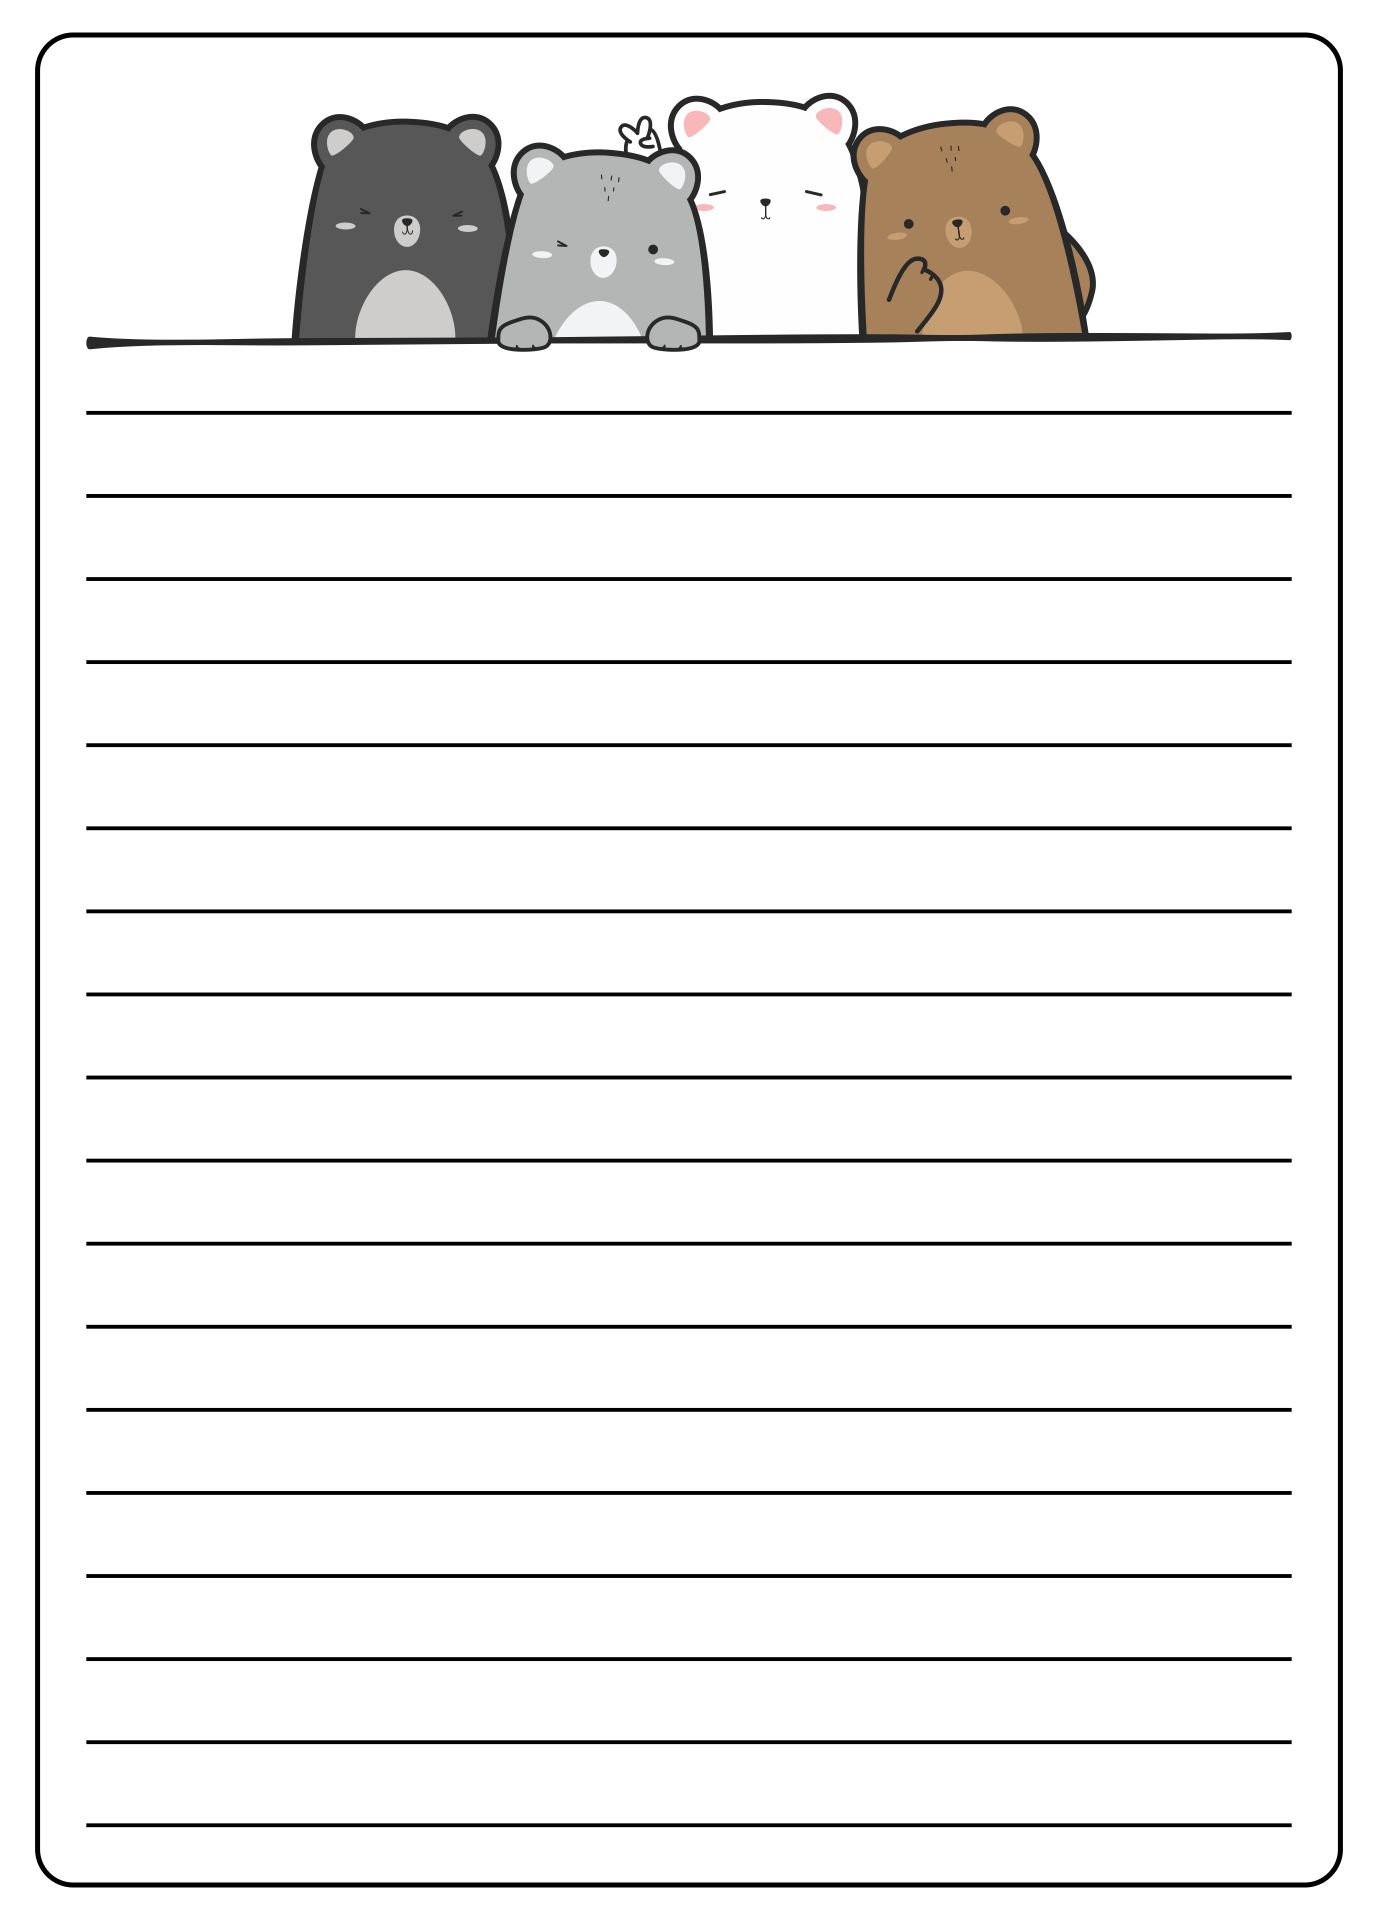 story-paper-printable-goldilocks-and-the-three-bears-retelling-with